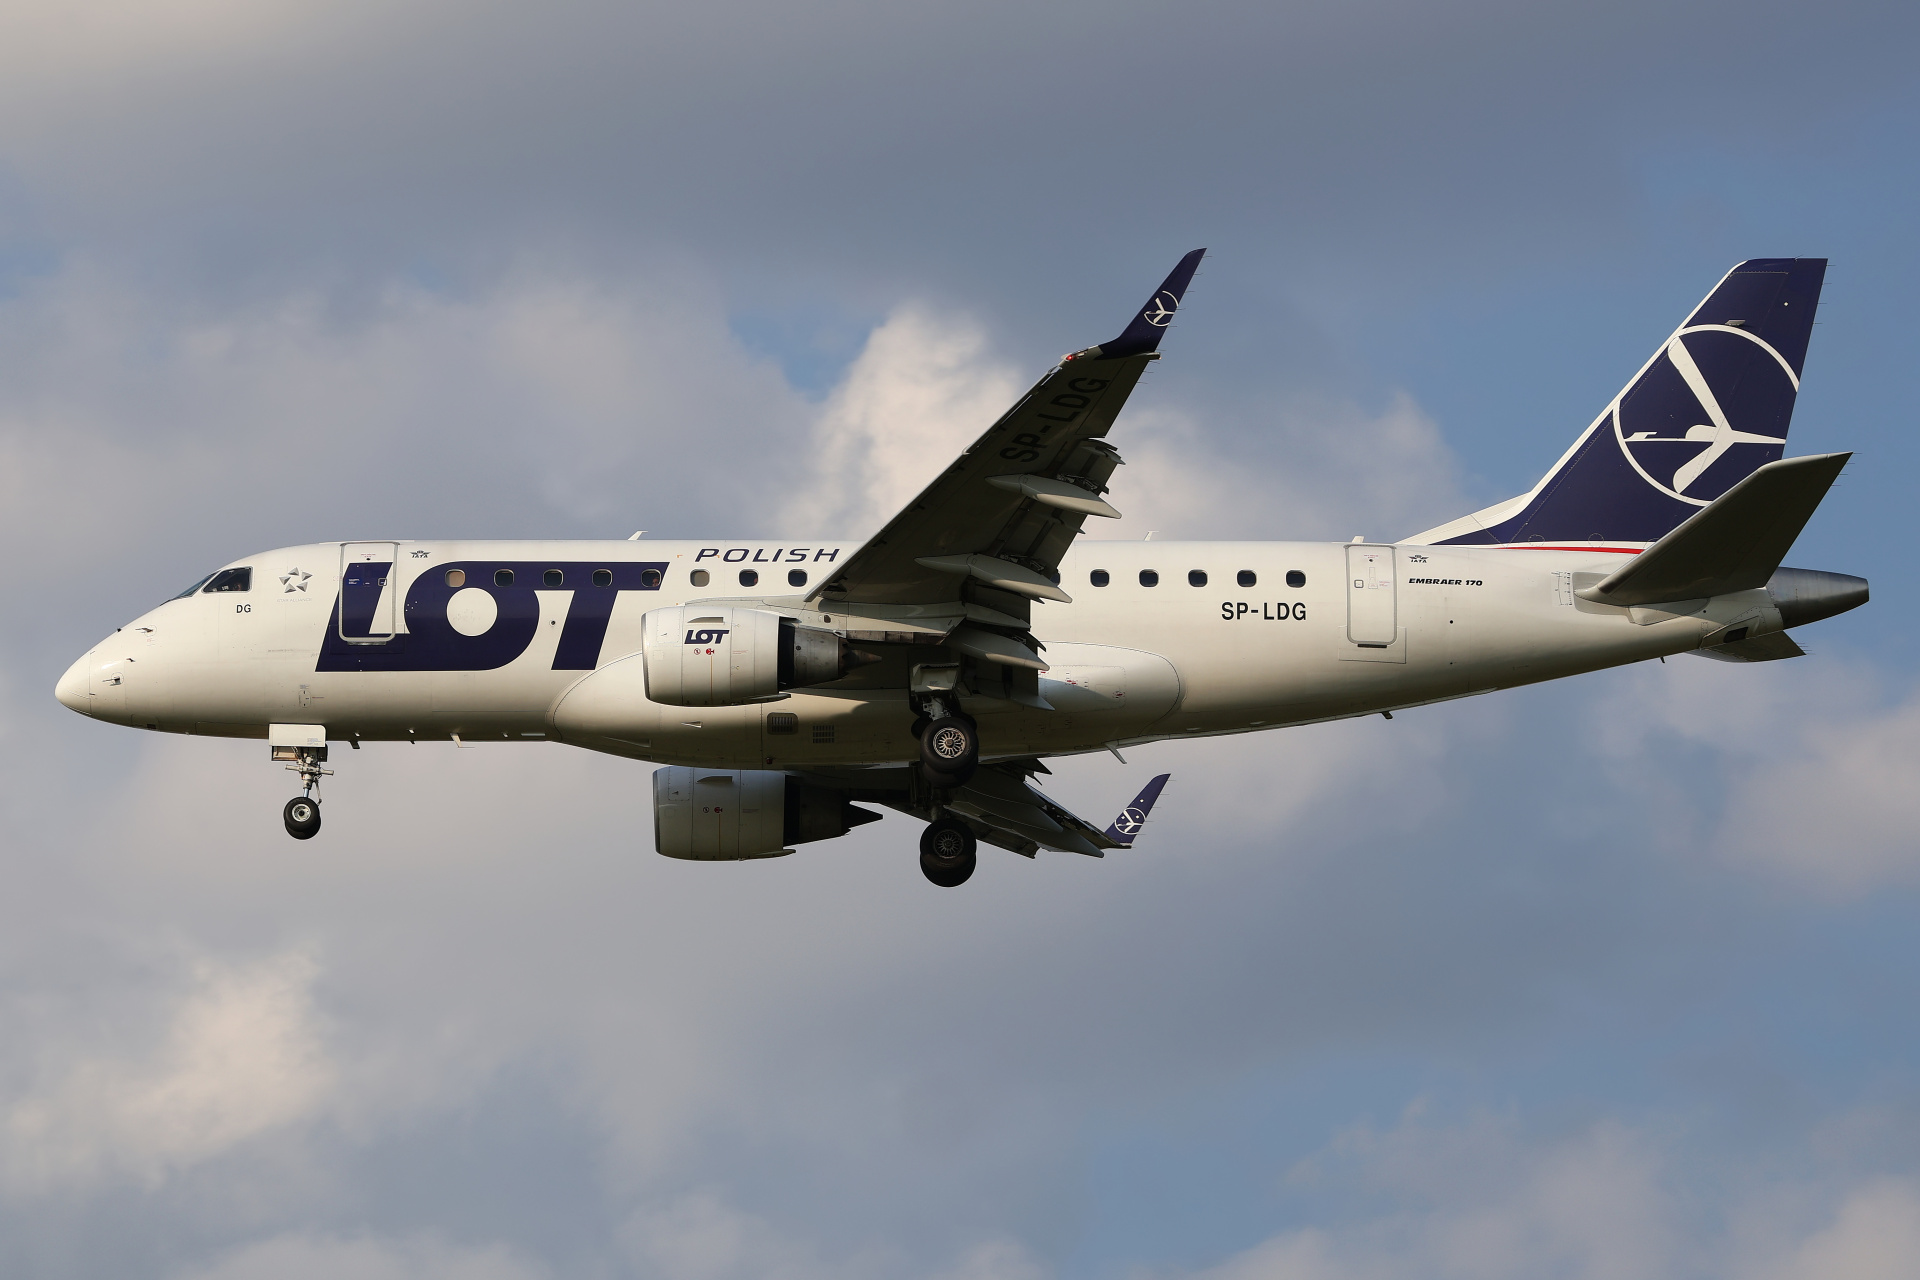 SP-LDG (new livery) (Aircraft » EPWA Spotting » Embraer E170 » LOT Polish Airlines)